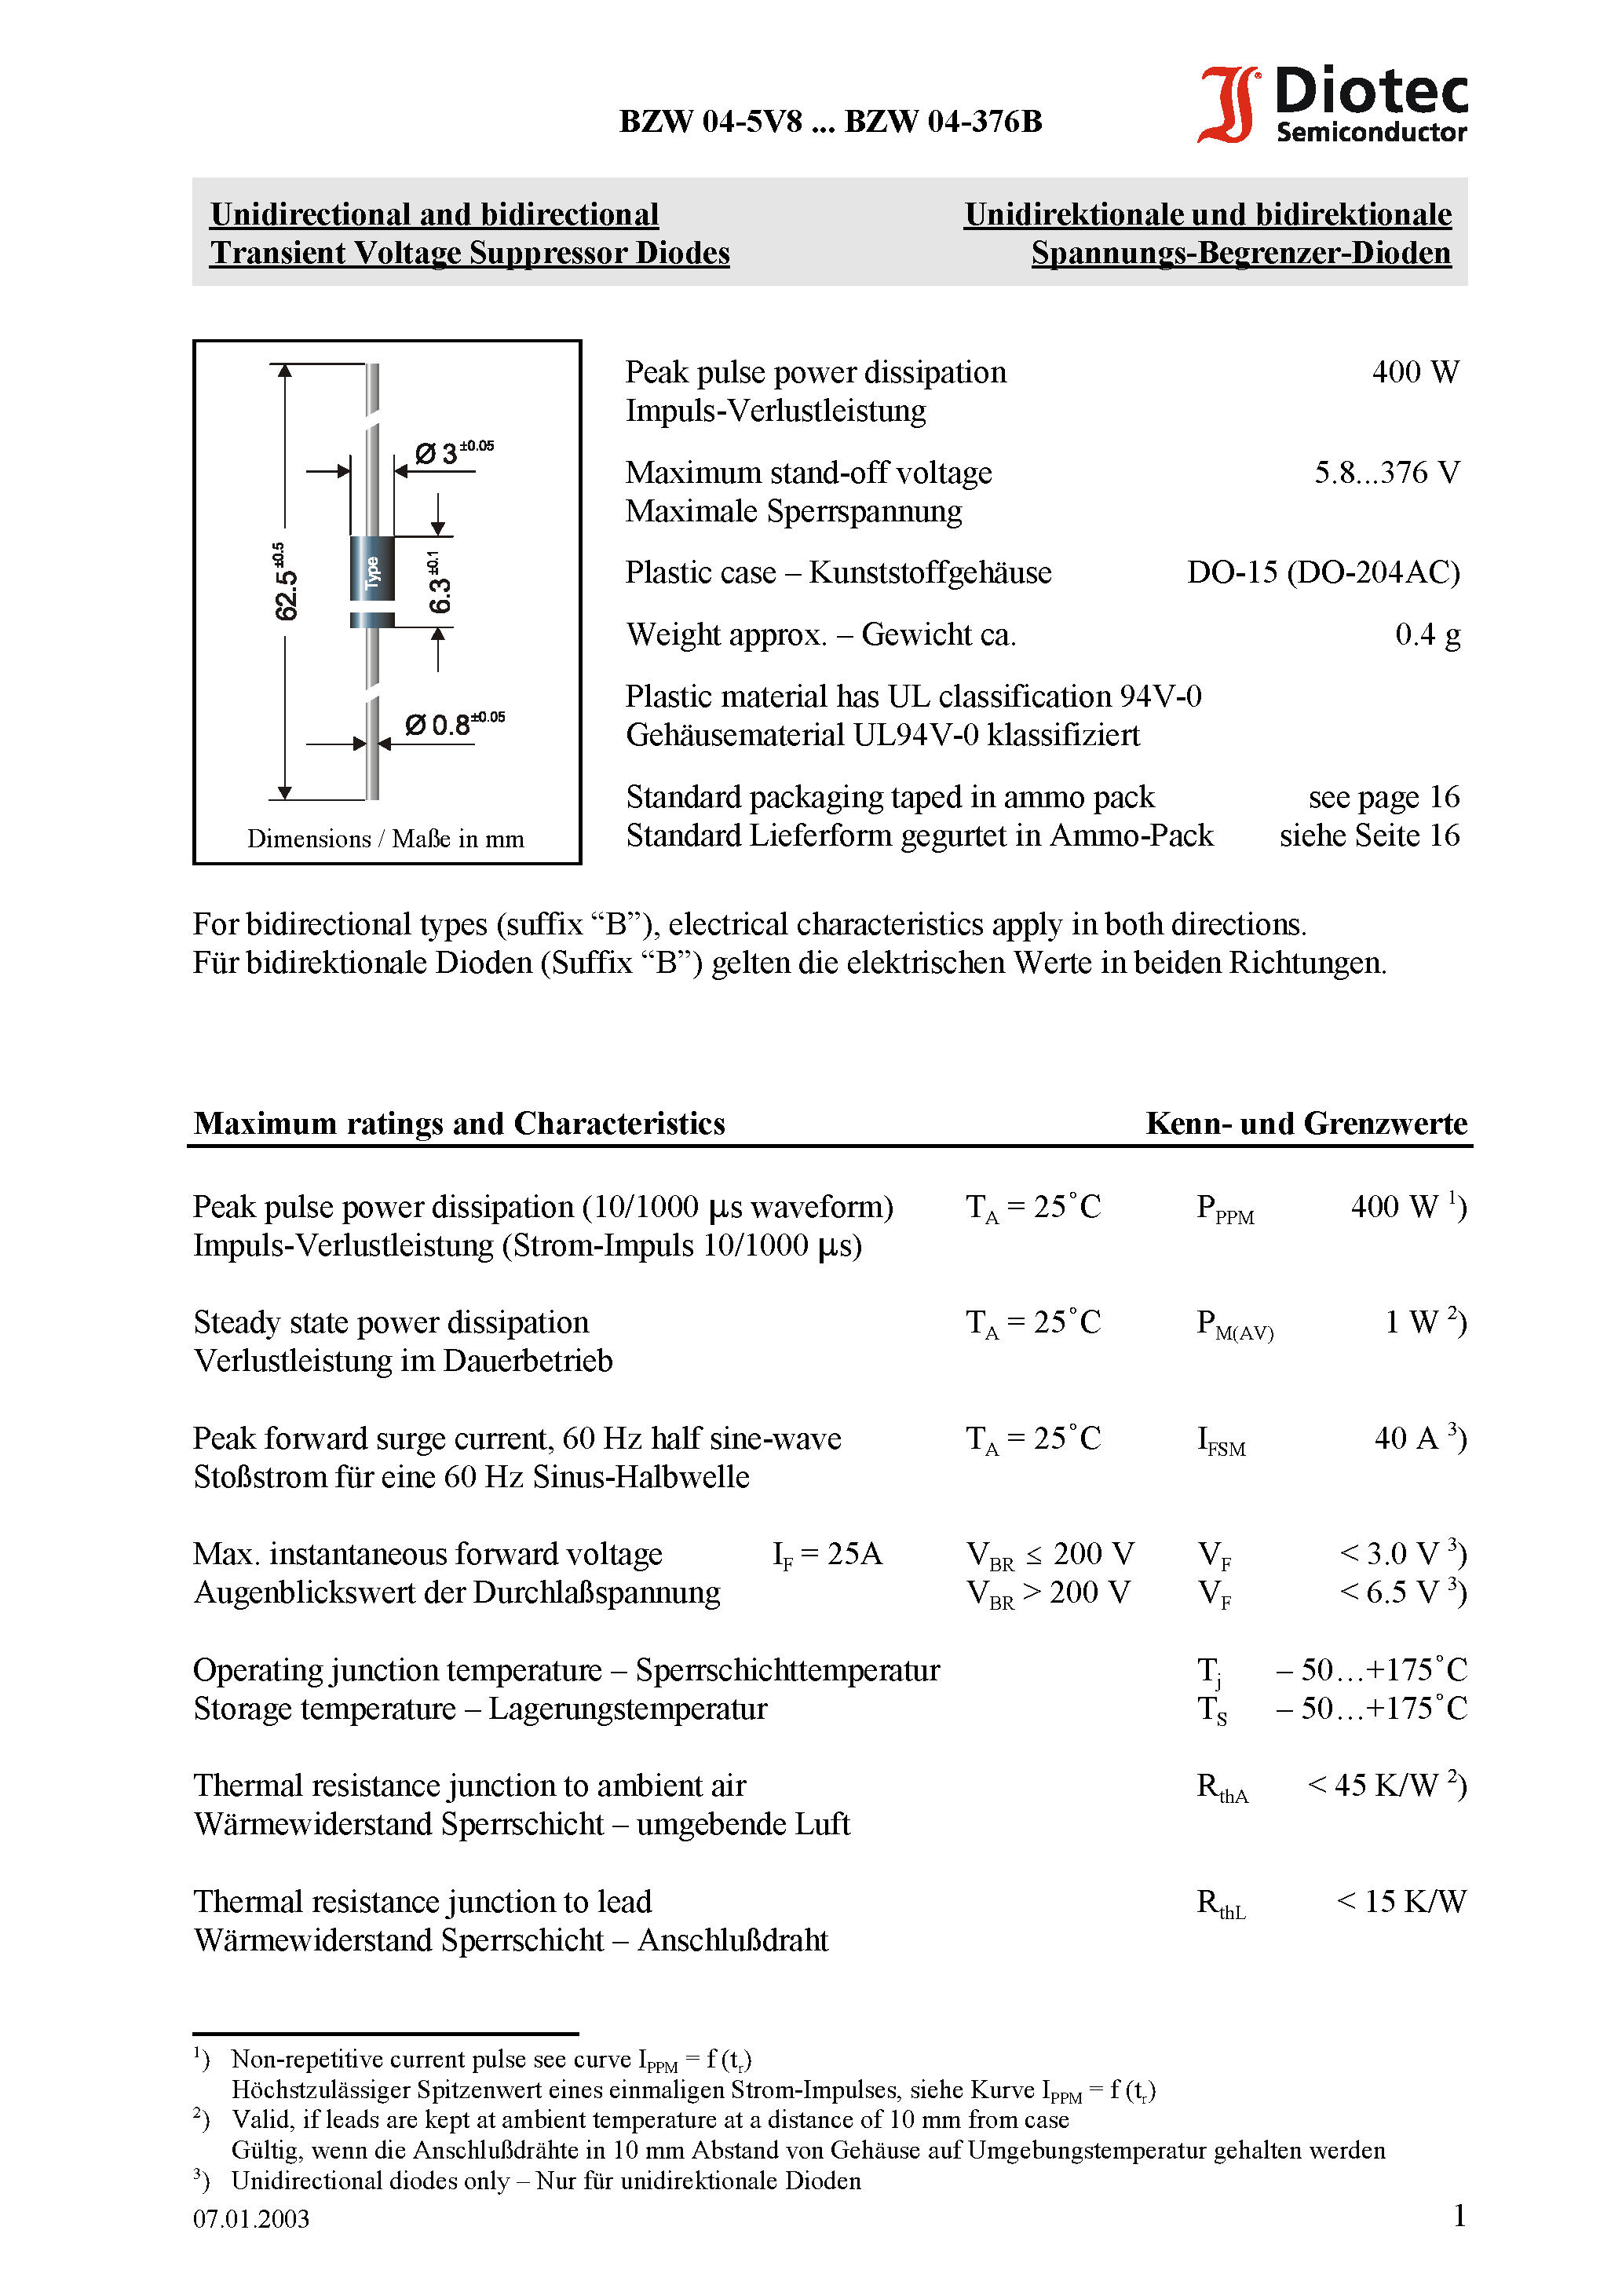 Datasheet BZW04-13 - Unidirectional and bidirectional Transient Voltage Suppressor Diodes page 1